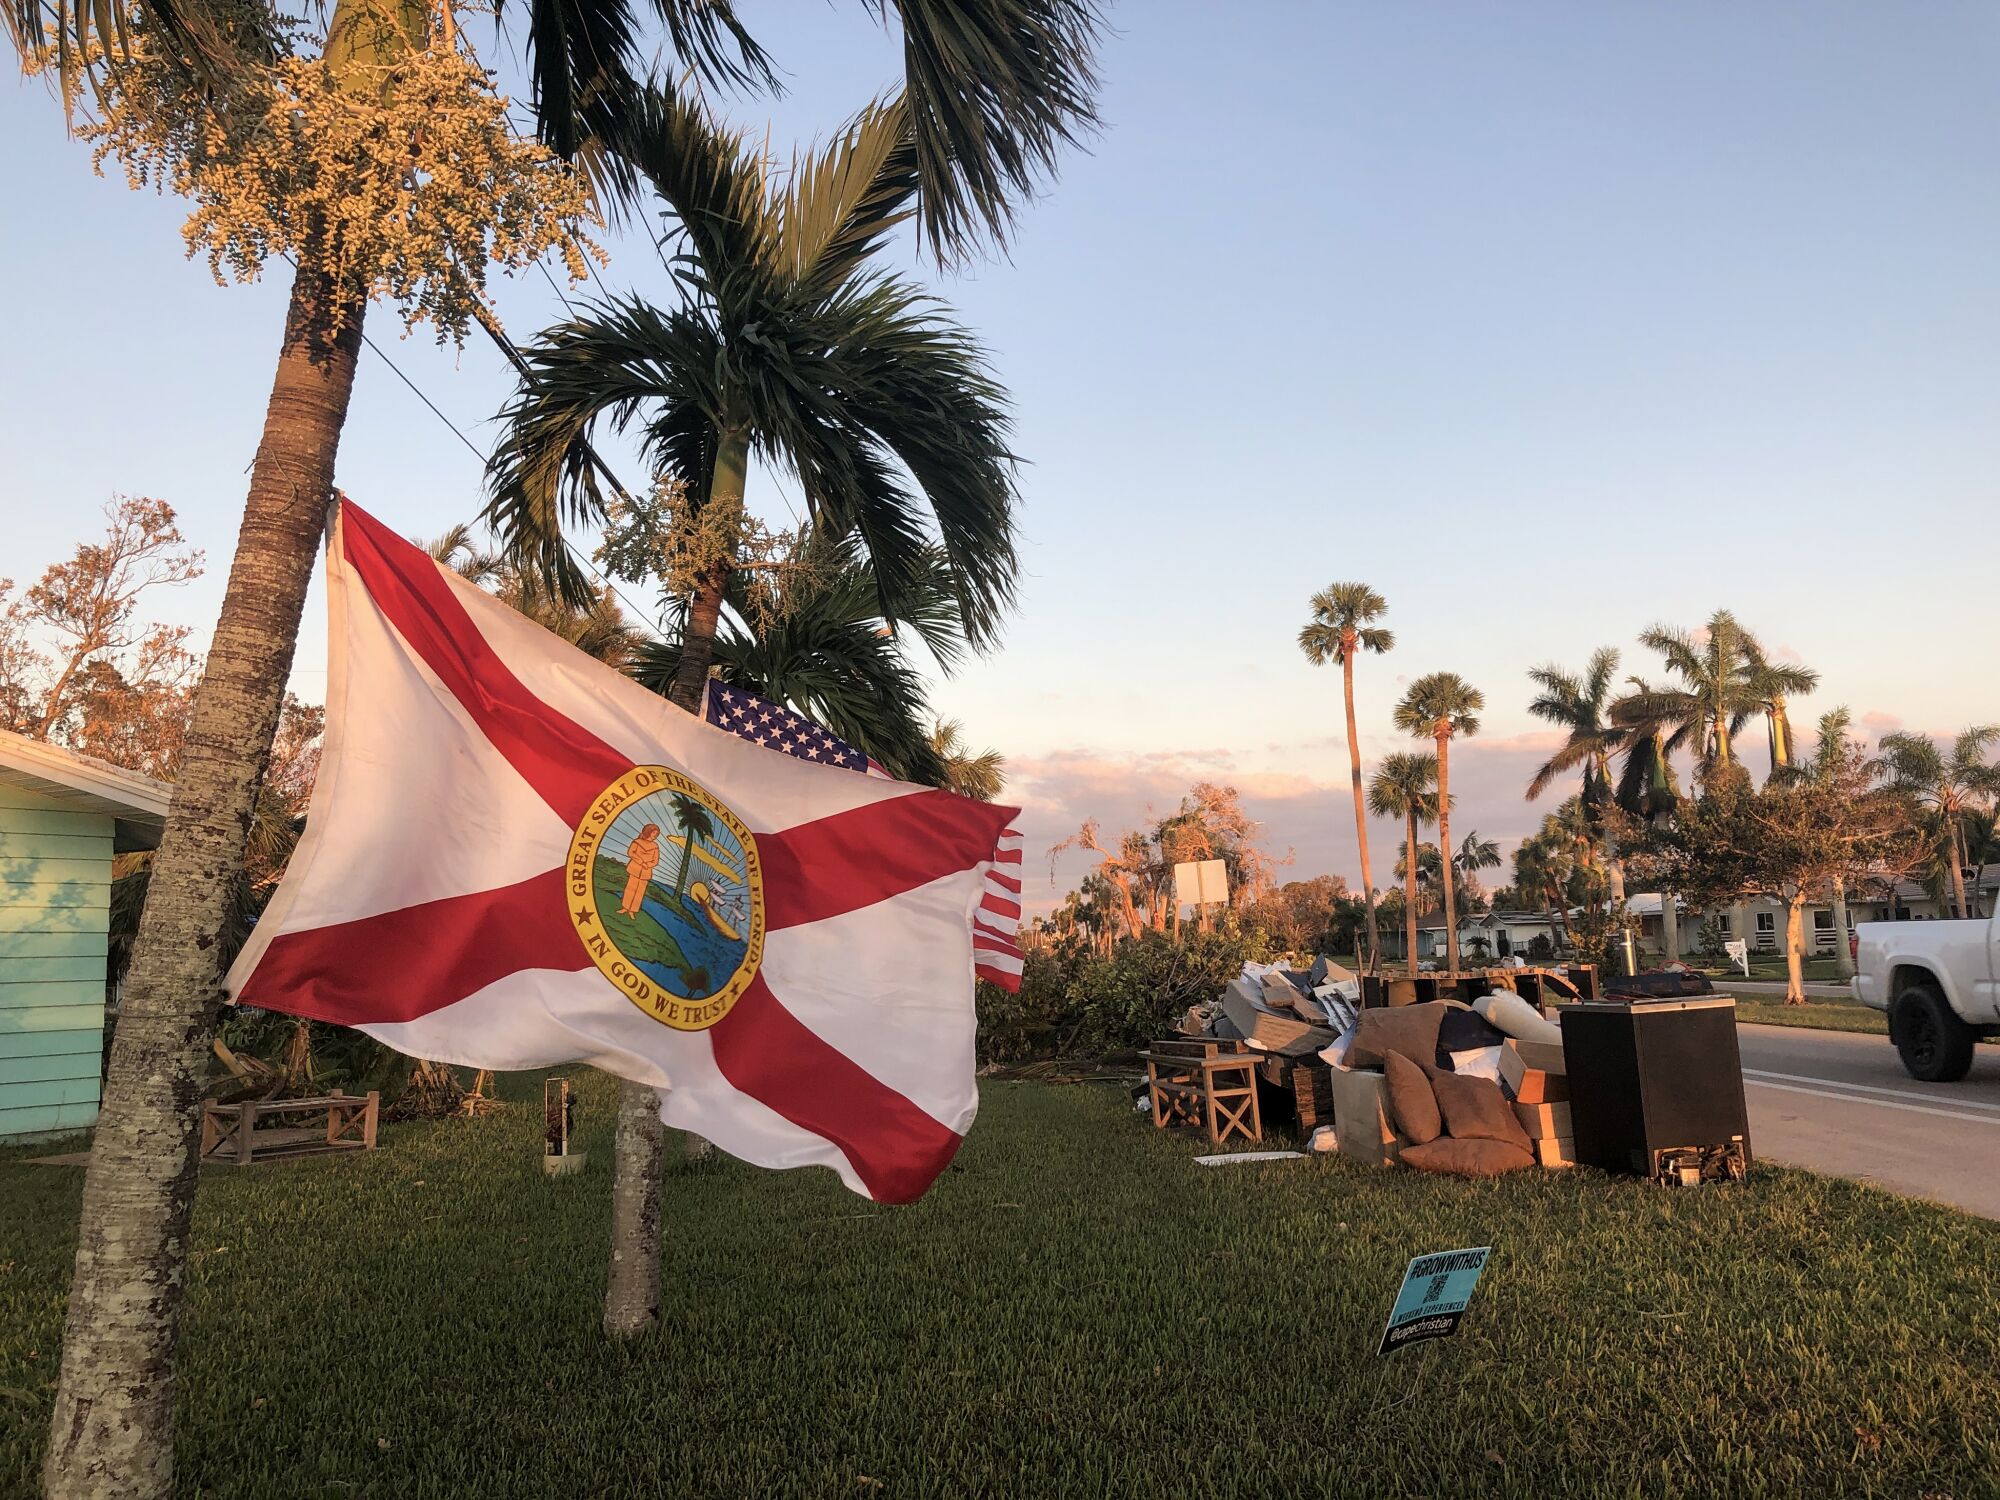 A Florida flag flies from a tree, with items from a home stacked behind